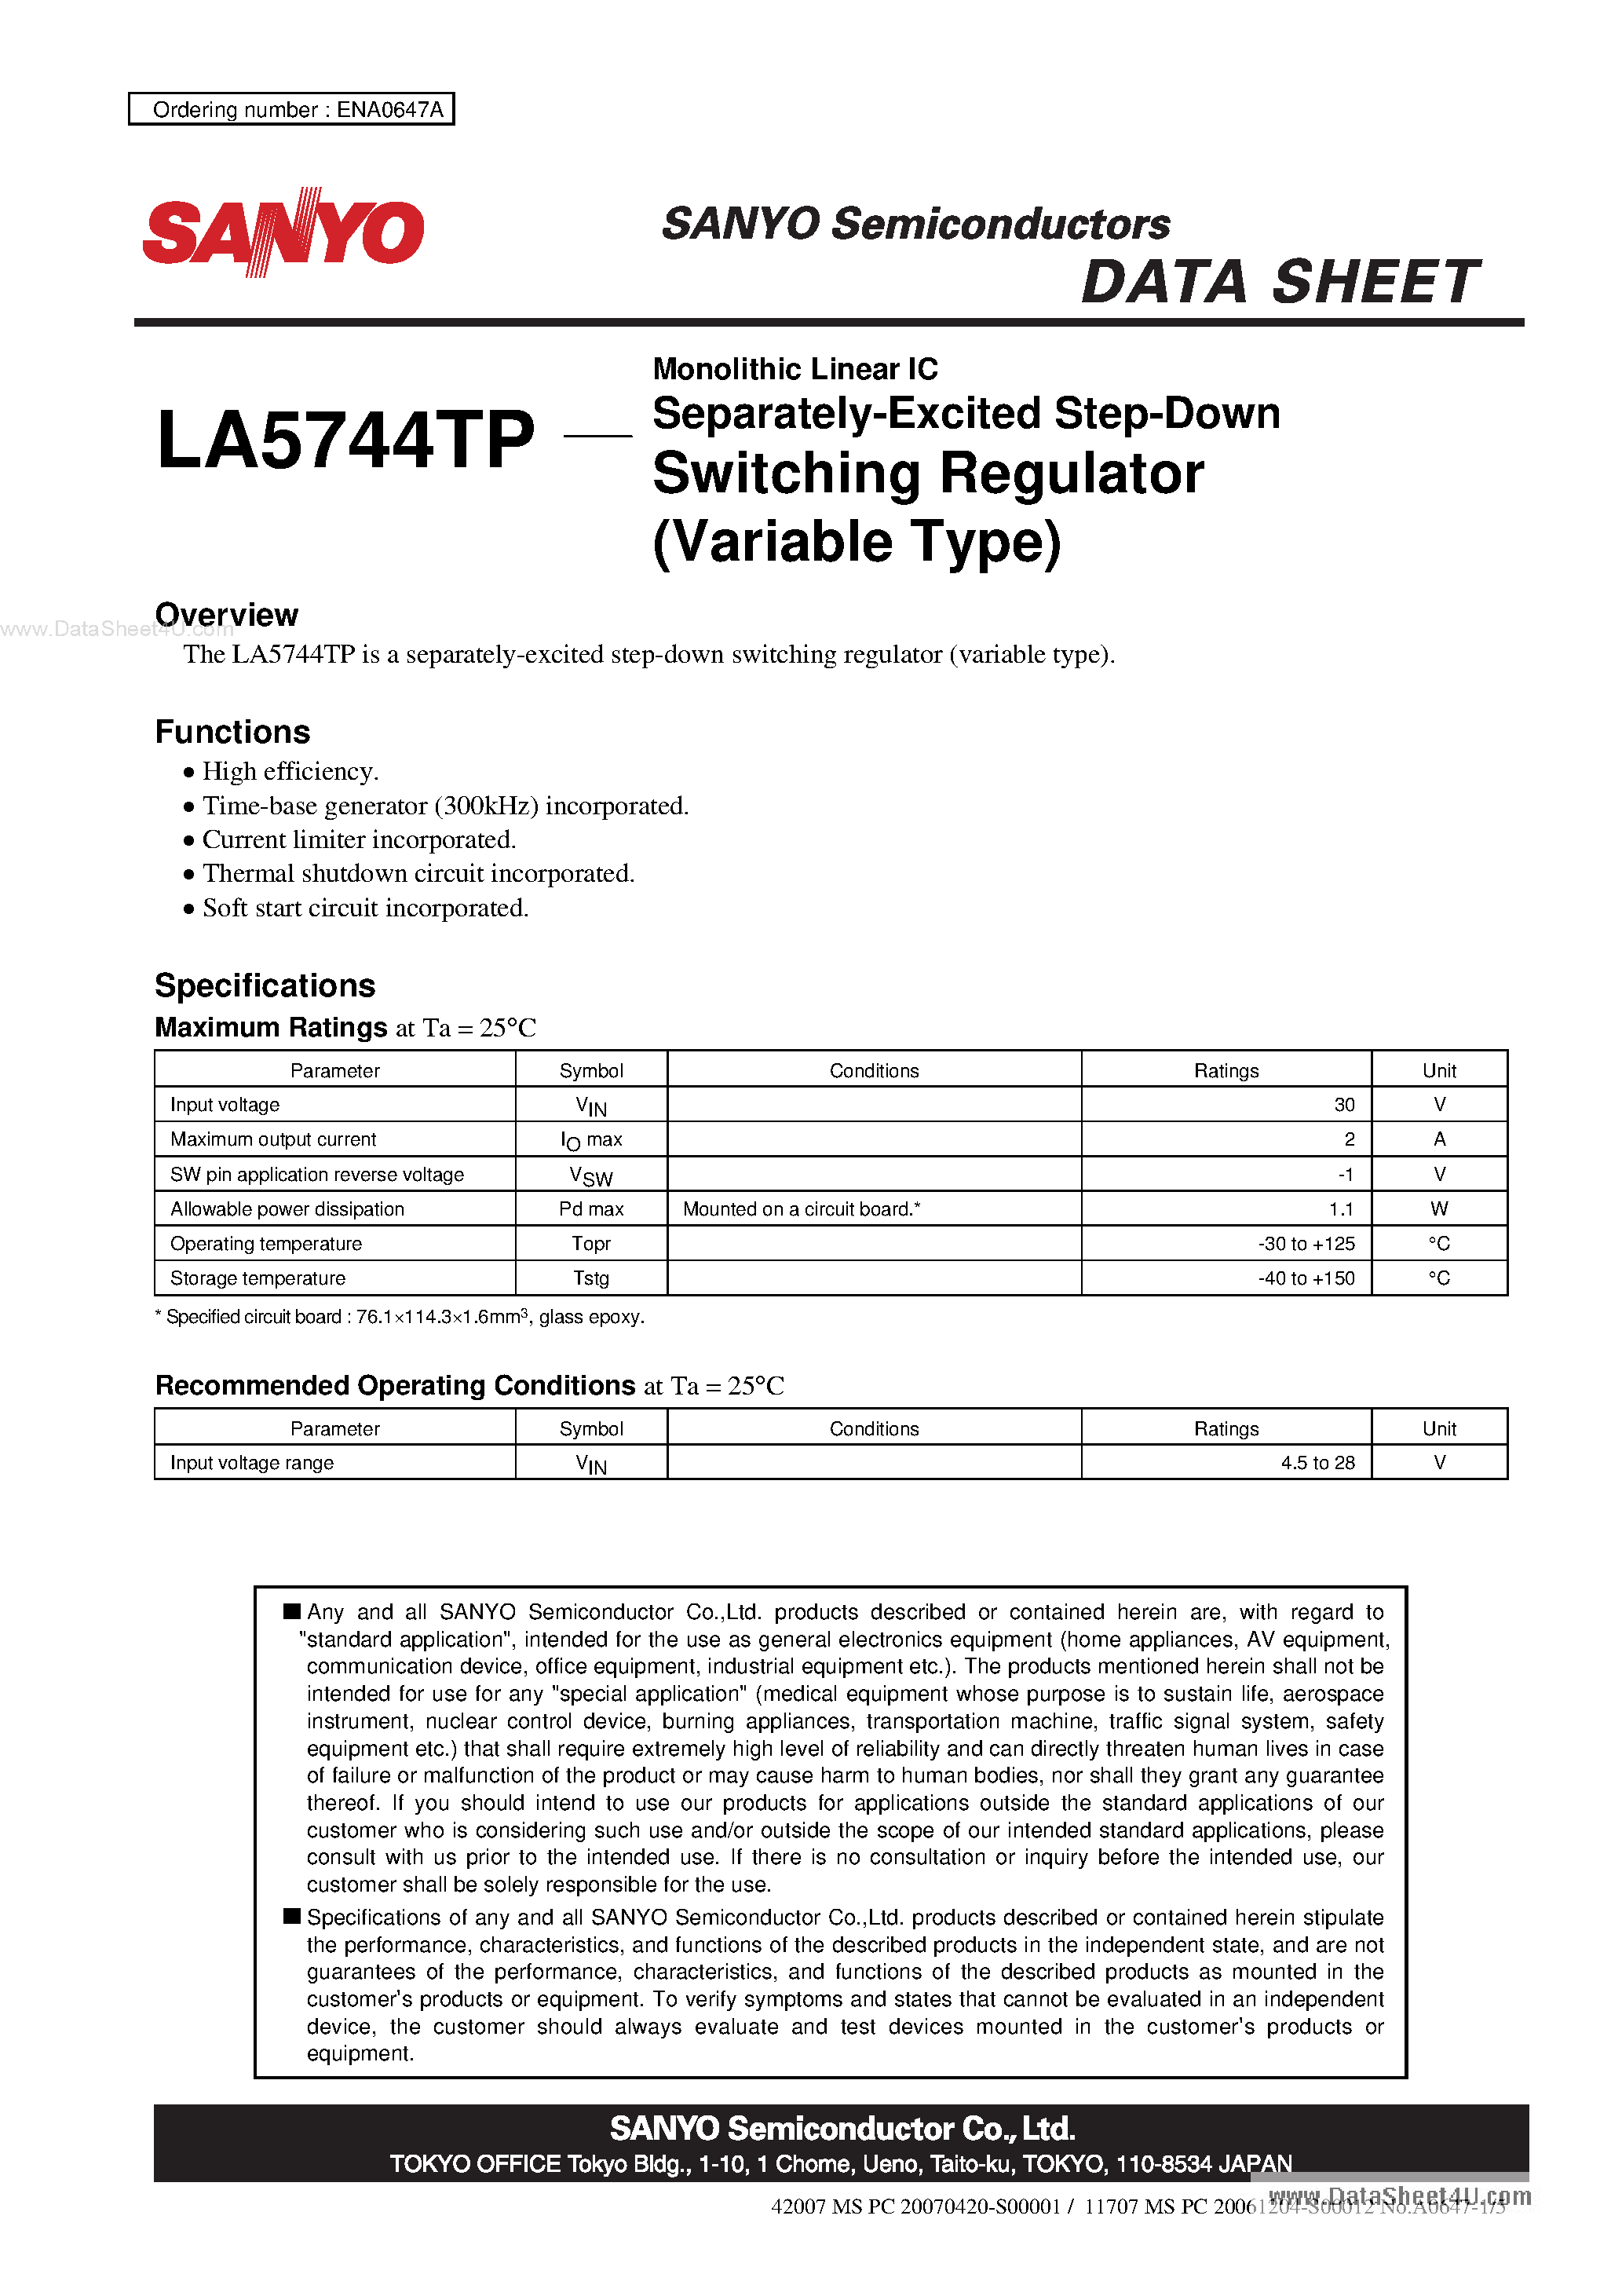 Даташит LA5744TP - Monolithic Linear IC Separately-Excited Step-Down Switching Regulator страница 1